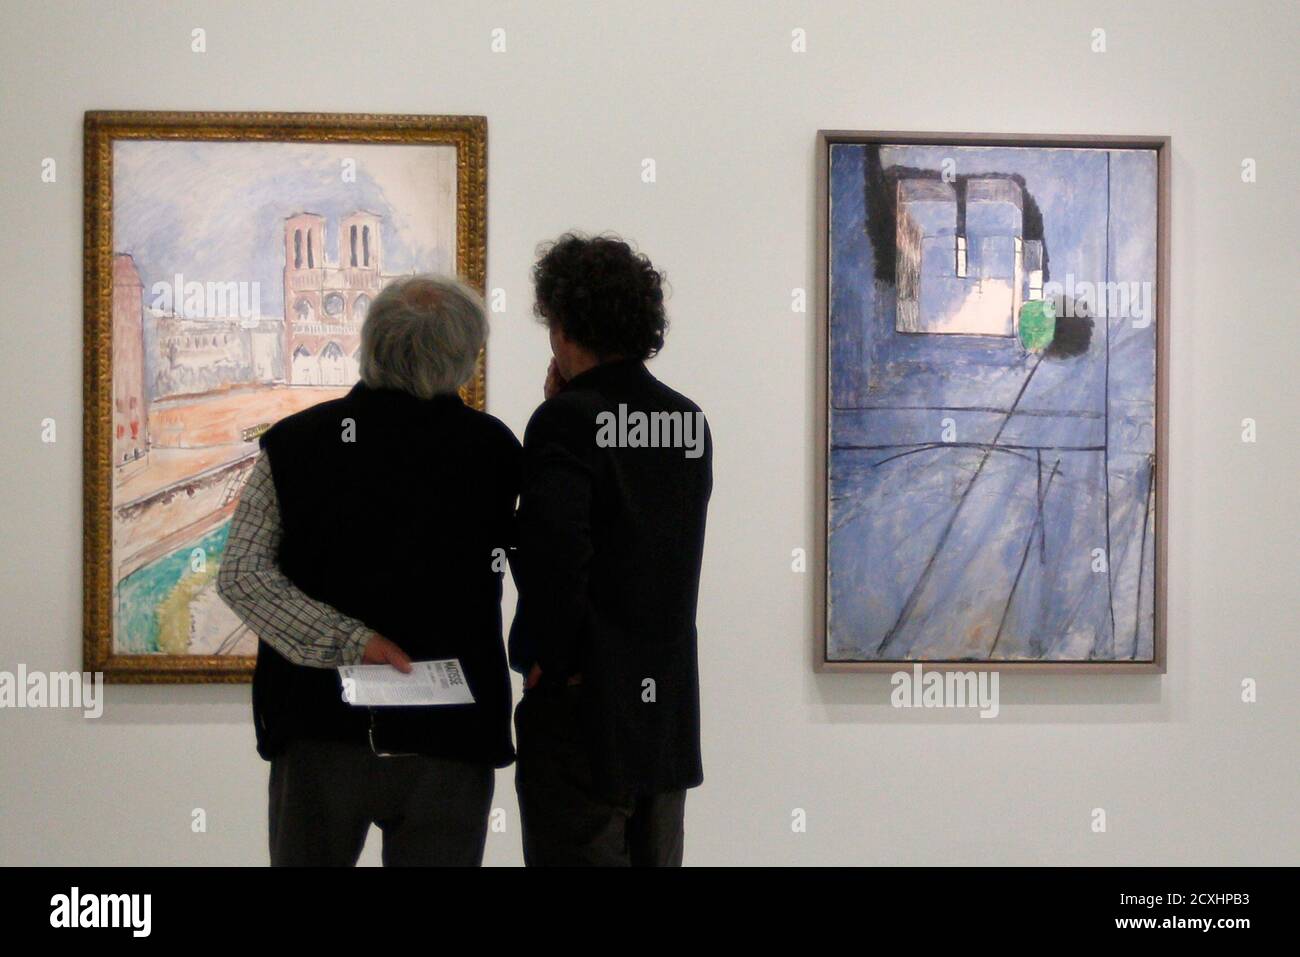 Visitors look at the paintings "Notre Dame" at L, and "Vue de Notre-Dame" ( View of Notre Dame, 1914) by French painter Henri Matisse (1859-1954)  during the press presentation of the exhibition "Matisse,